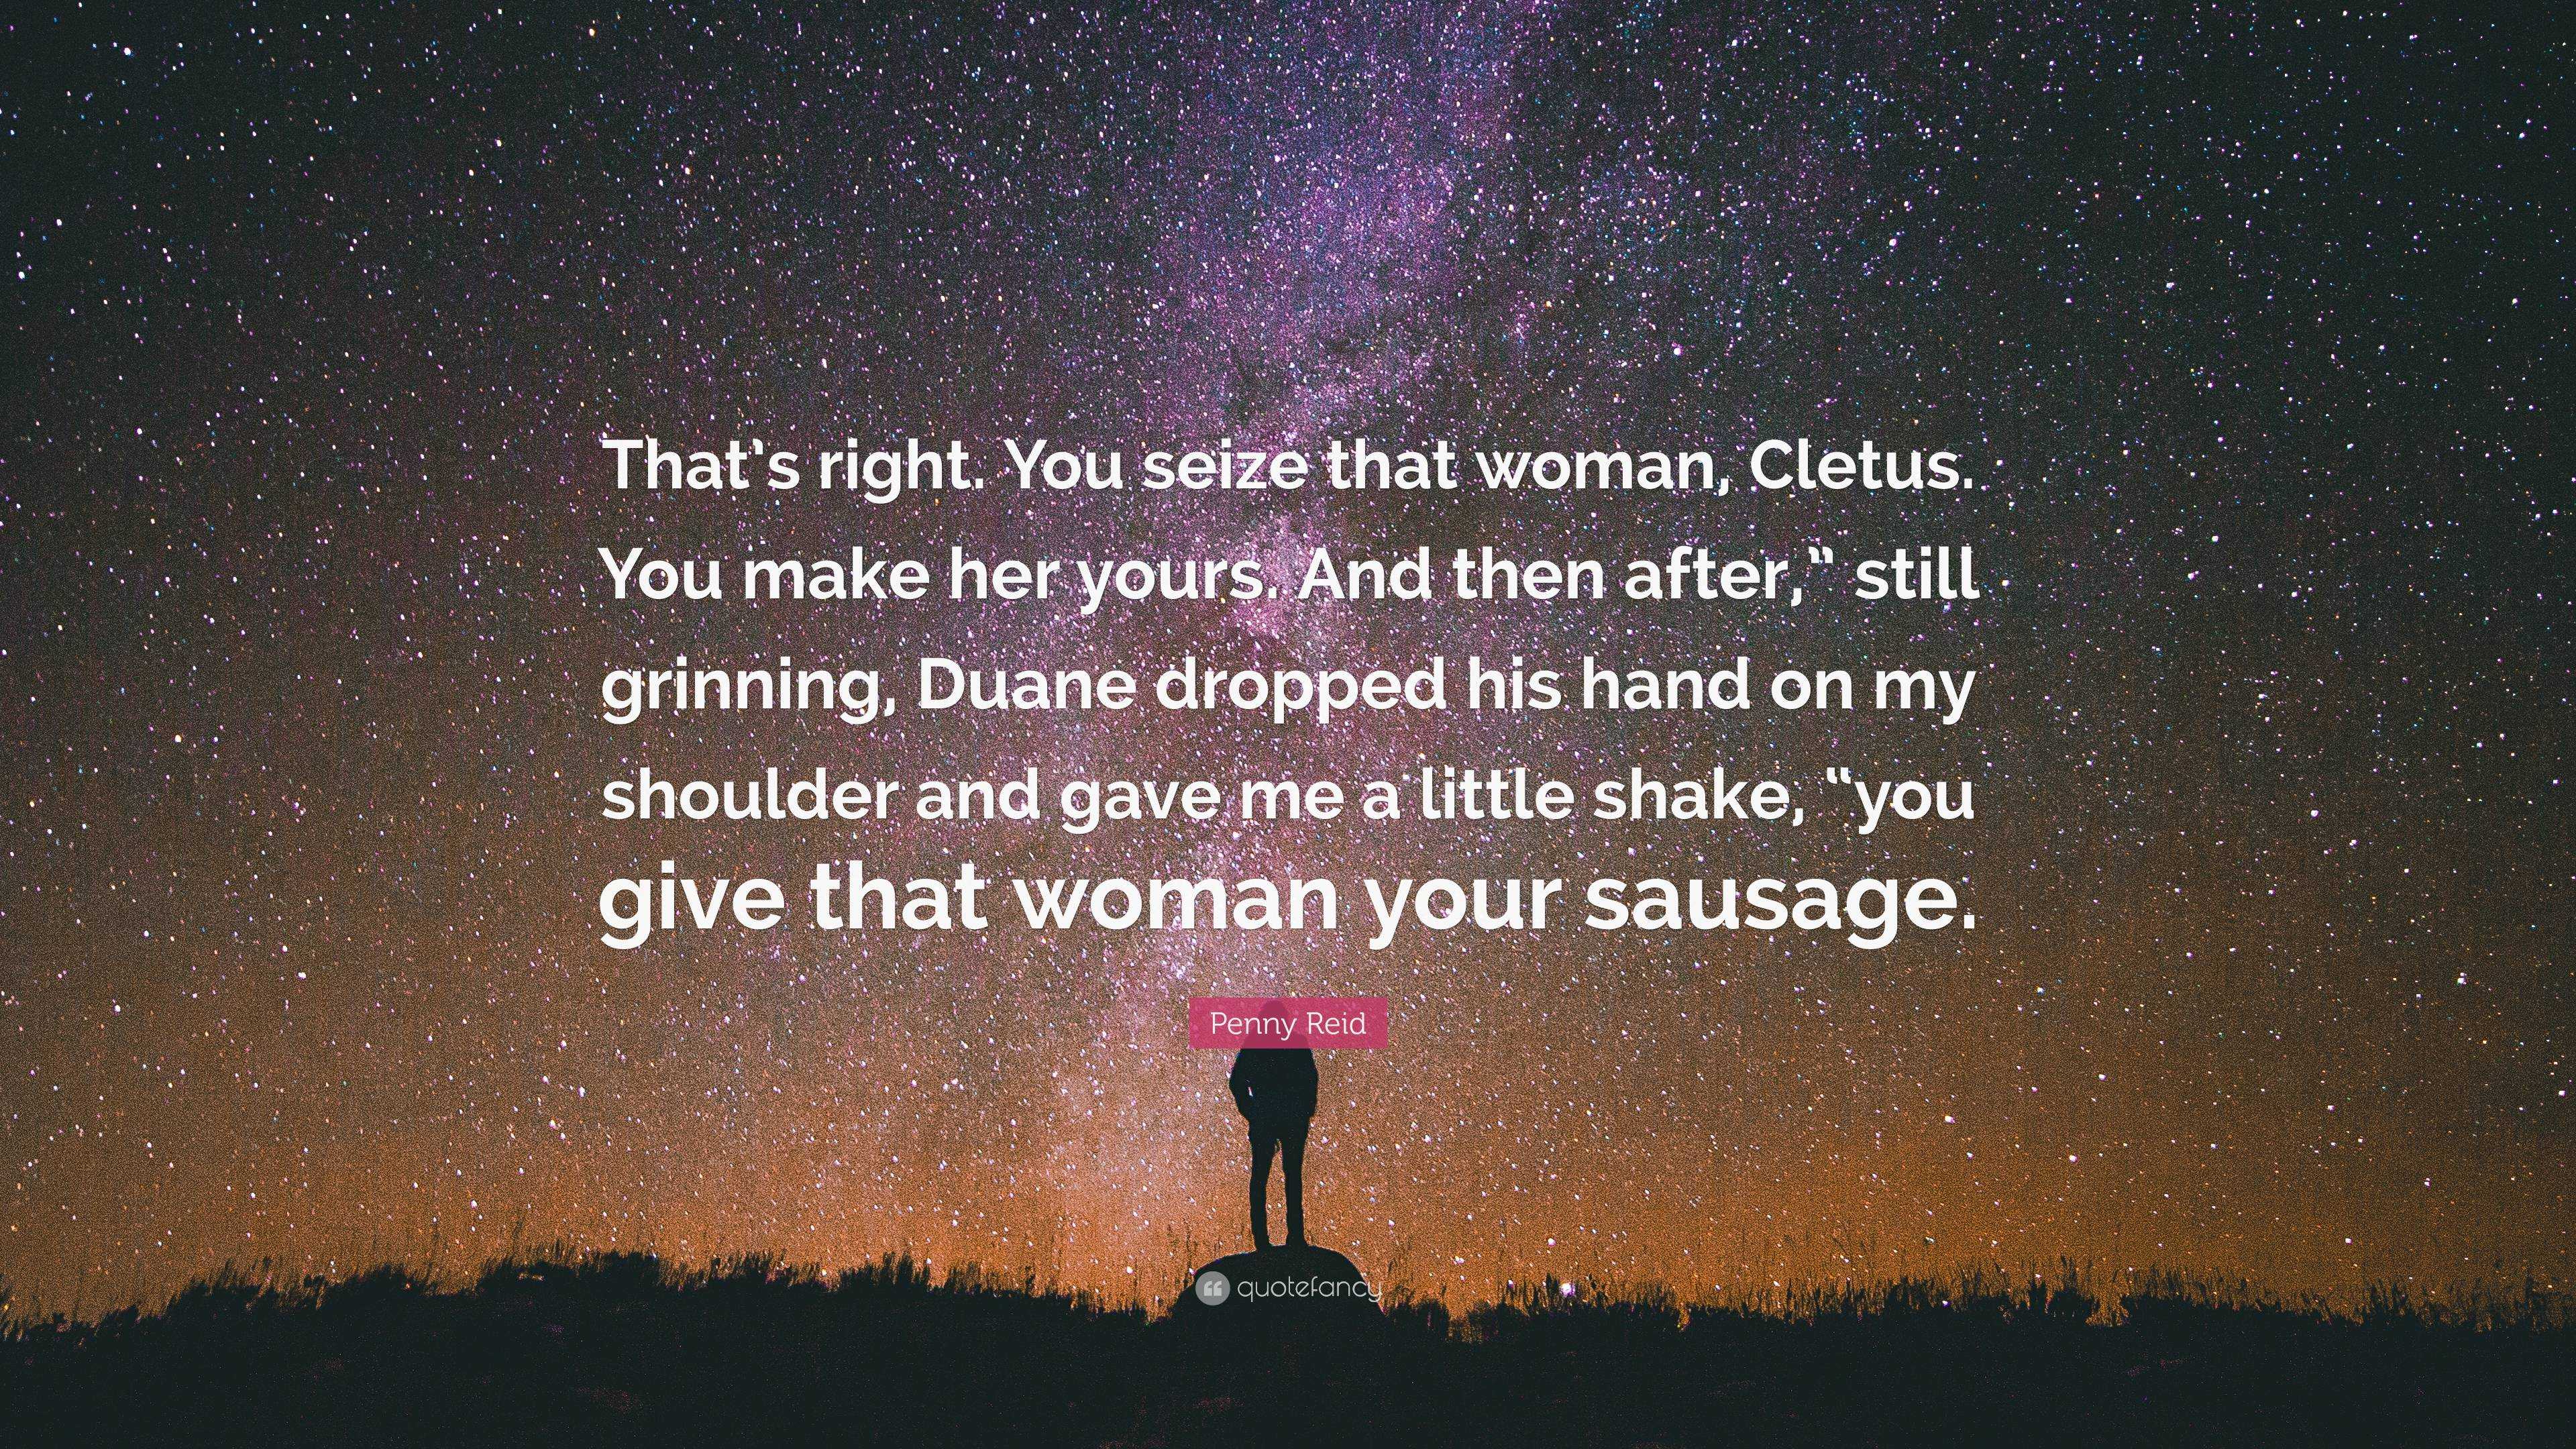 Penny Reid Quote: “That’s right. You seize that woman, Cletus. You make ...